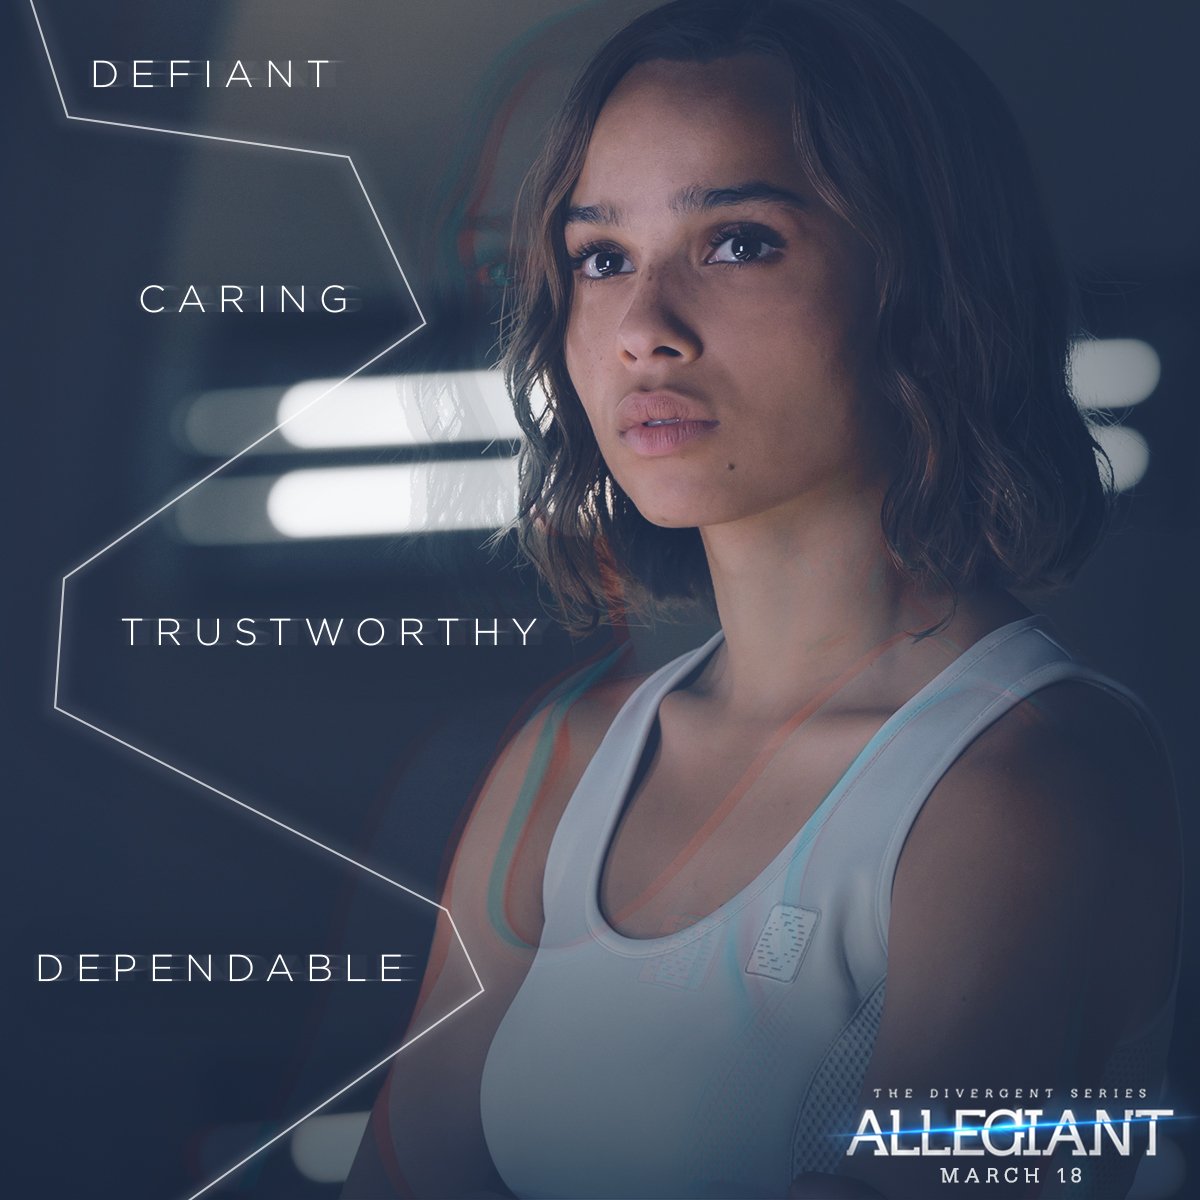 TheDivergentSeries "Candor by blood, Dauntless by nature. #Christina #WeAreAllegiant / Twitter